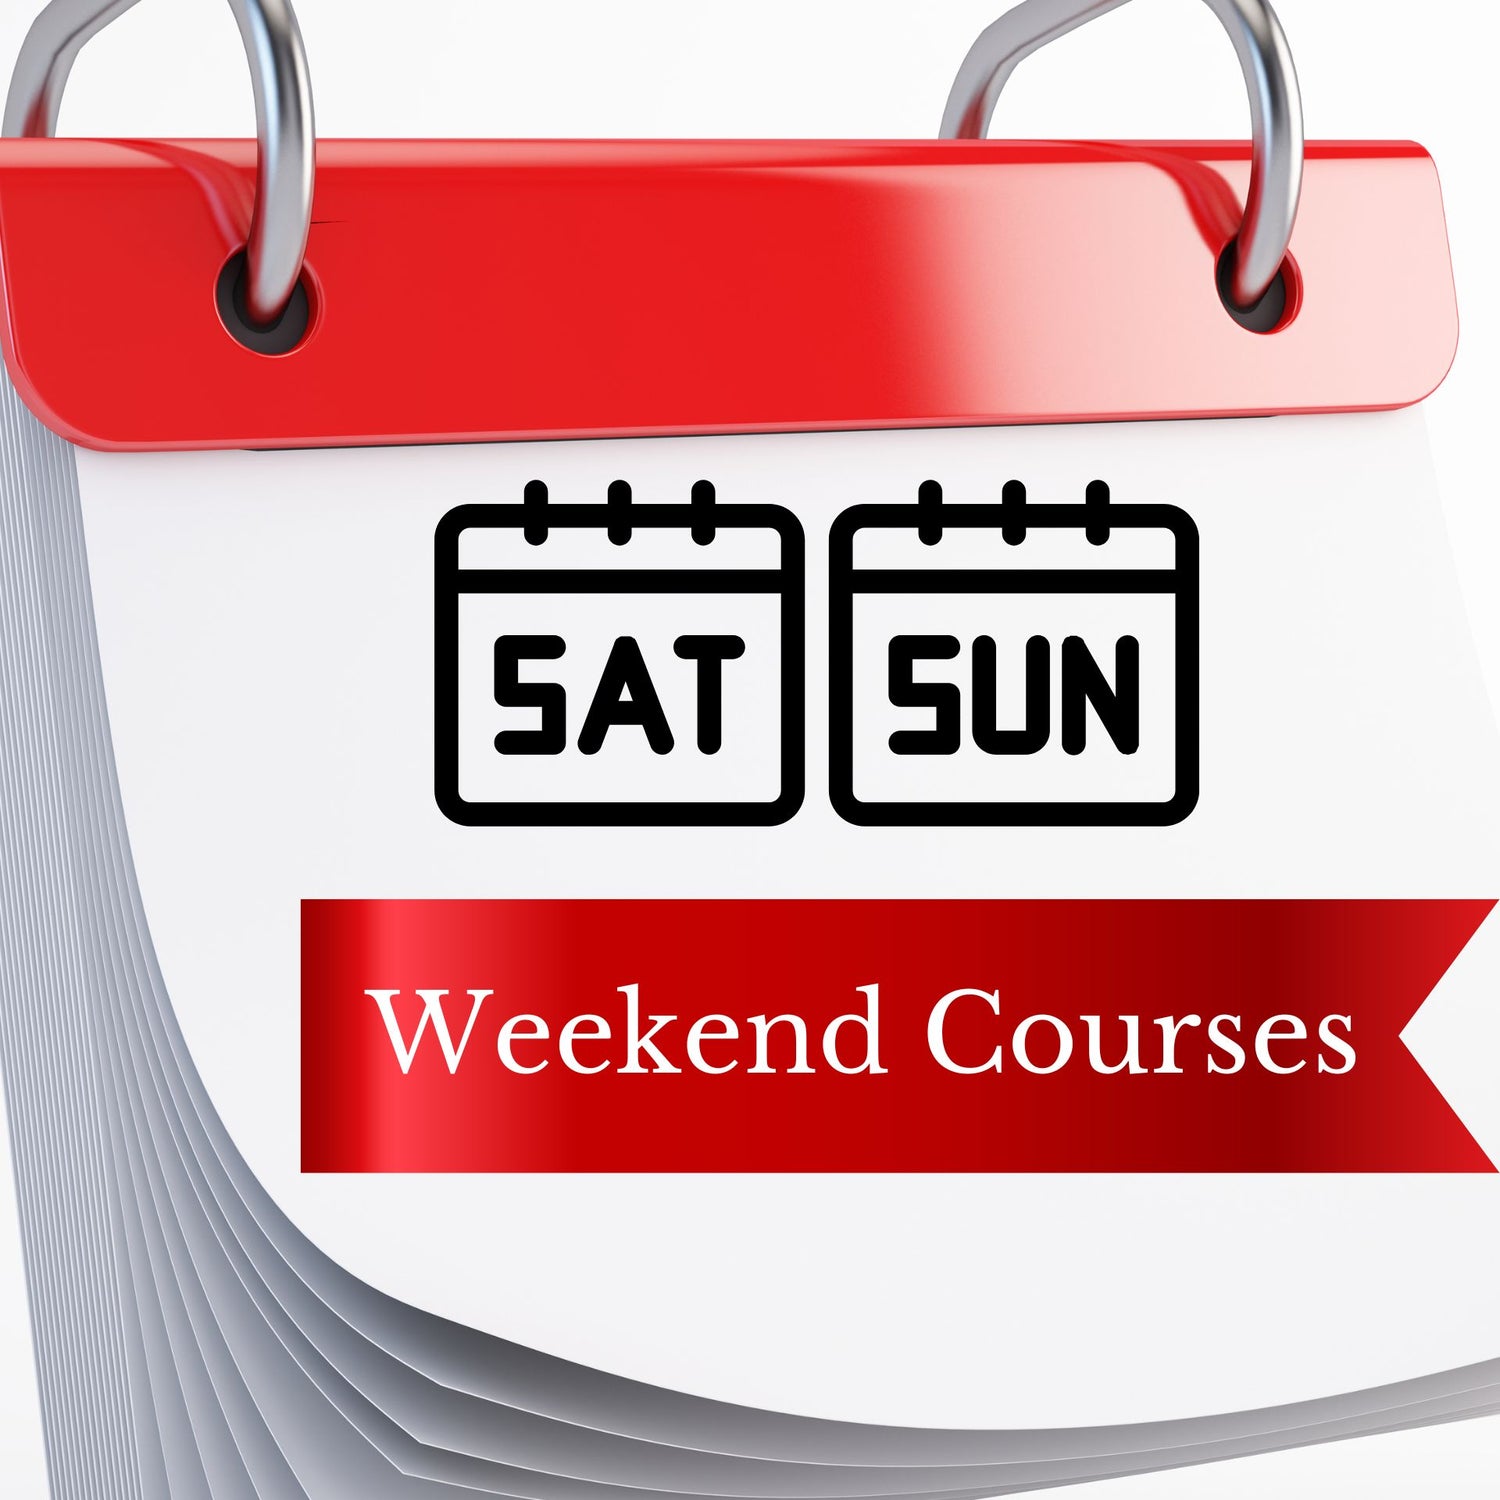 Weekend Courses